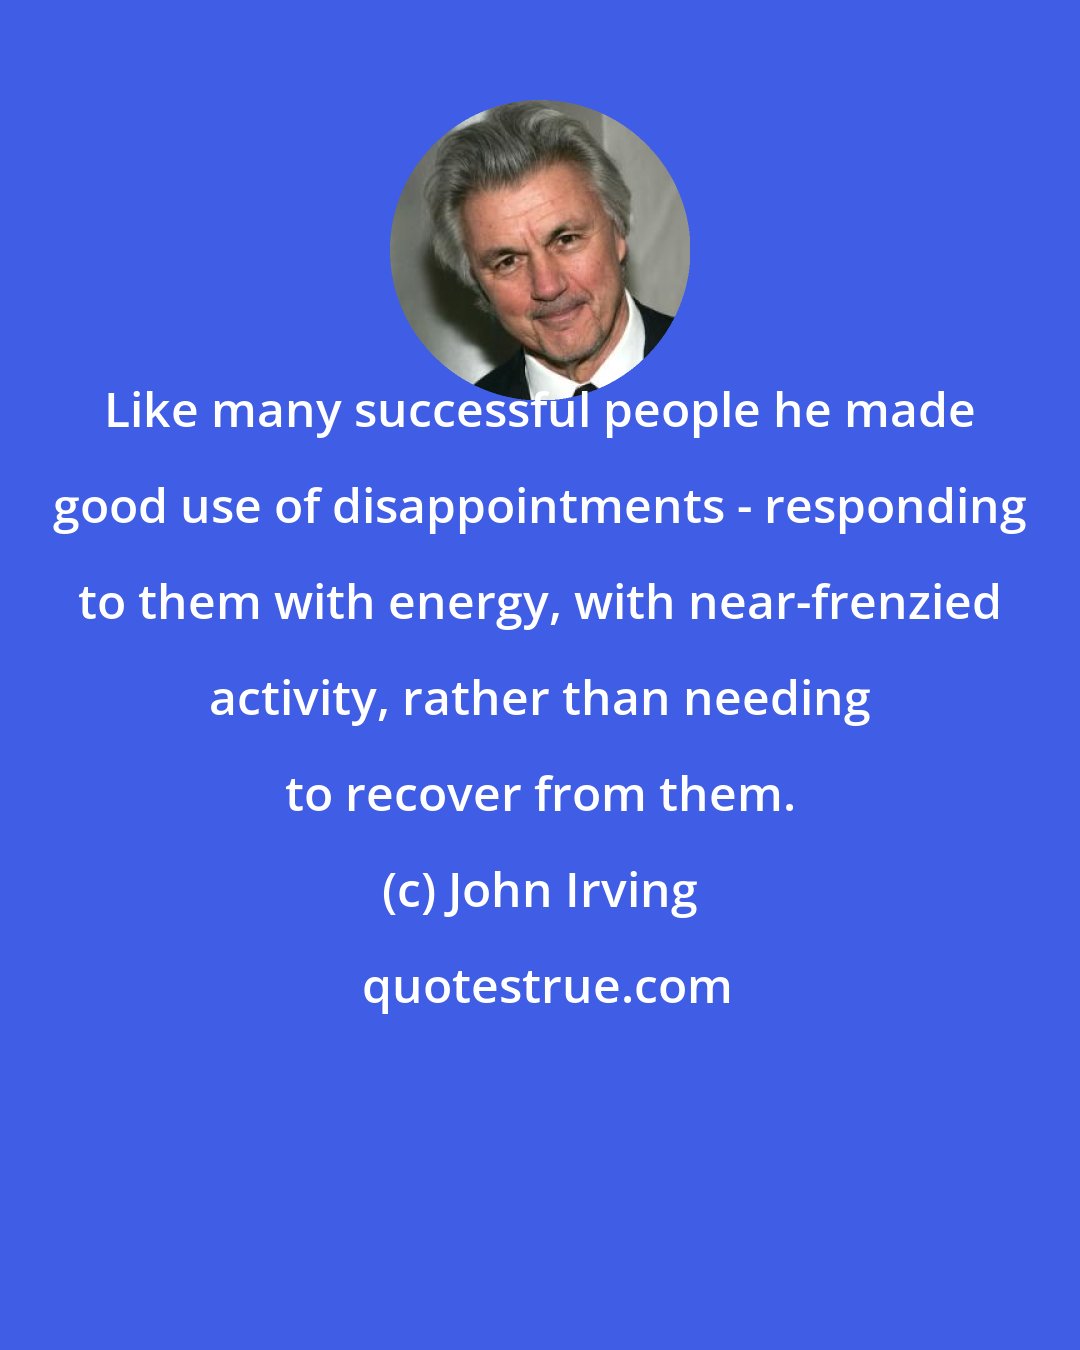 John Irving: Like many successful people he made good use of disappointments - responding to them with energy, with near-frenzied activity, rather than needing to recover from them.